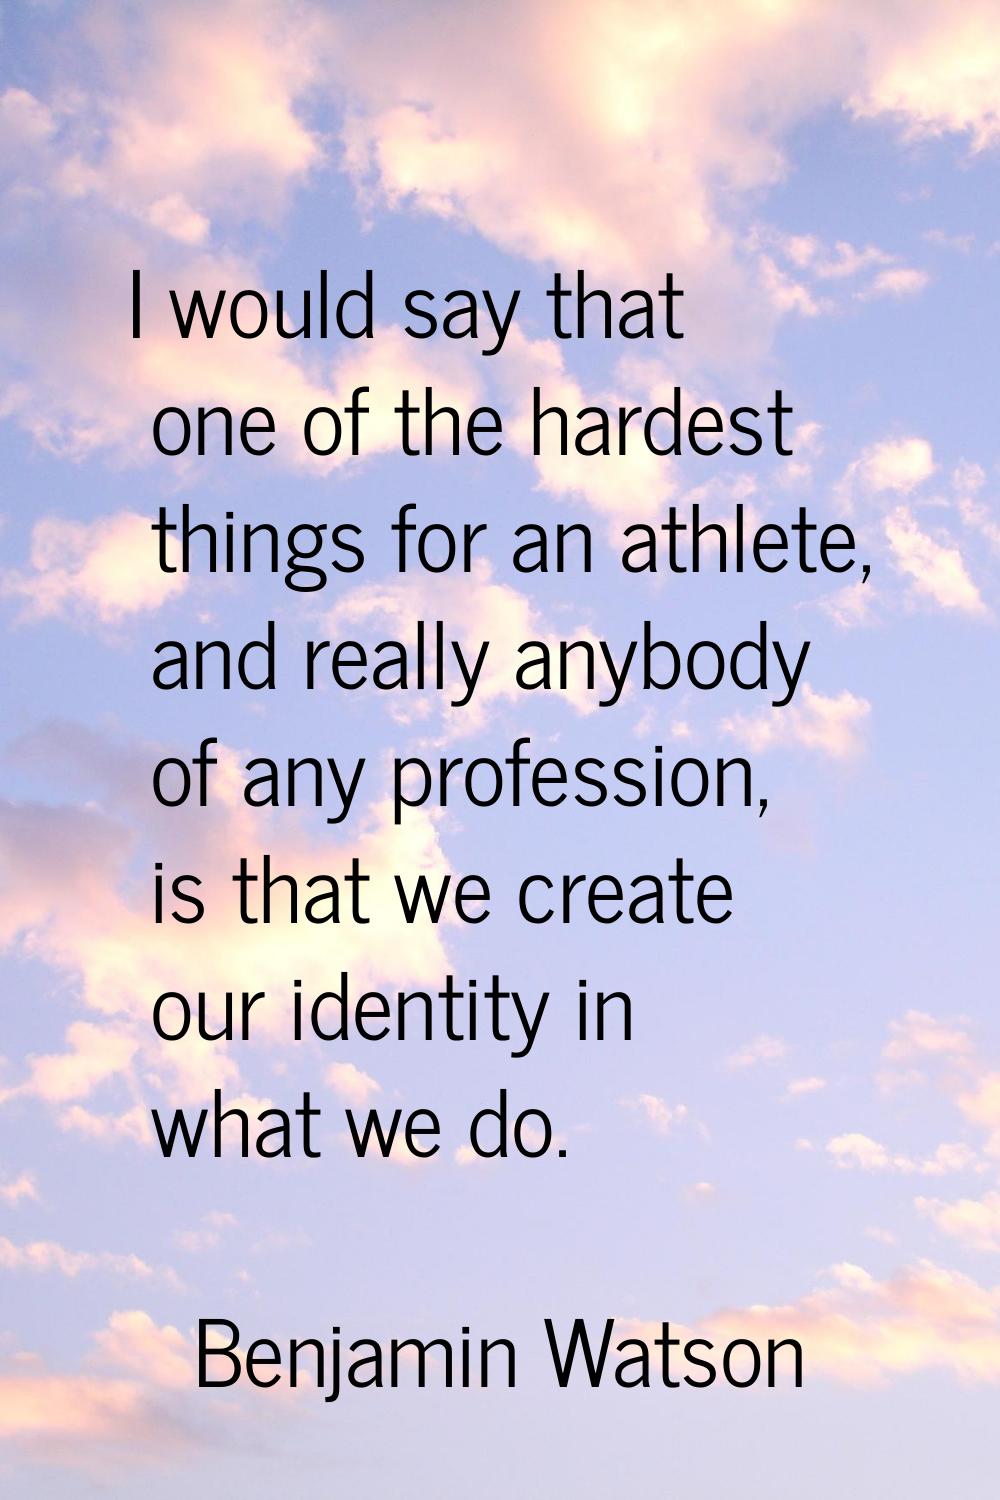 I would say that one of the hardest things for an athlete, and really anybody of any profession, is